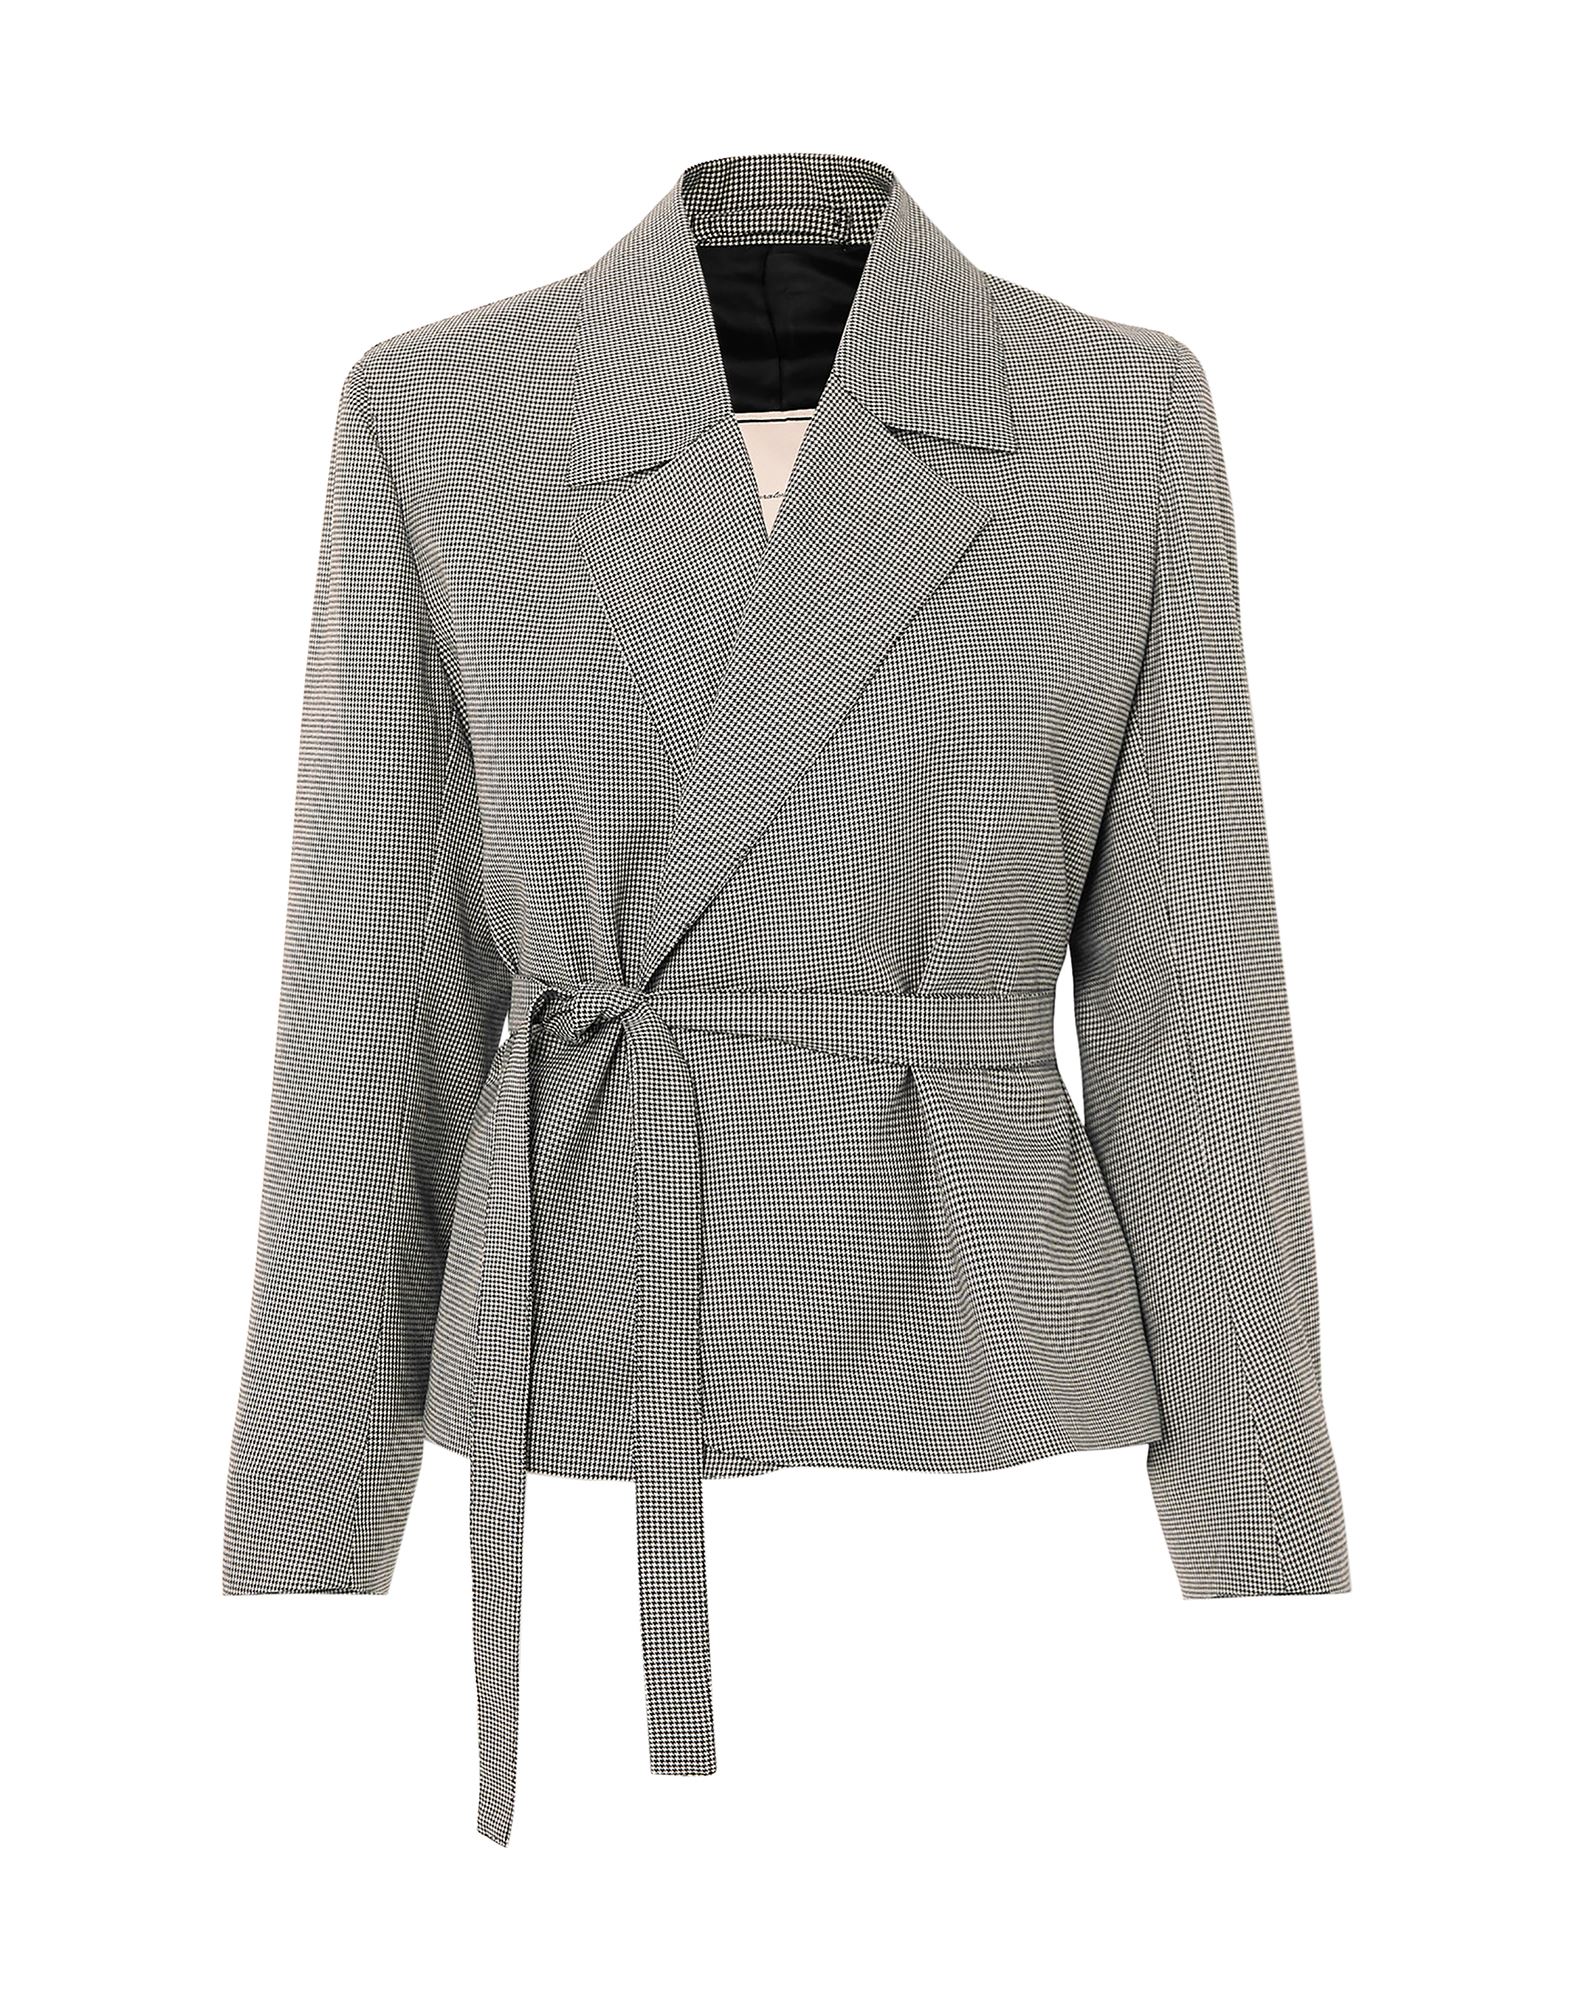 GIULIVA HERITAGE COLLECTION Suit jackets